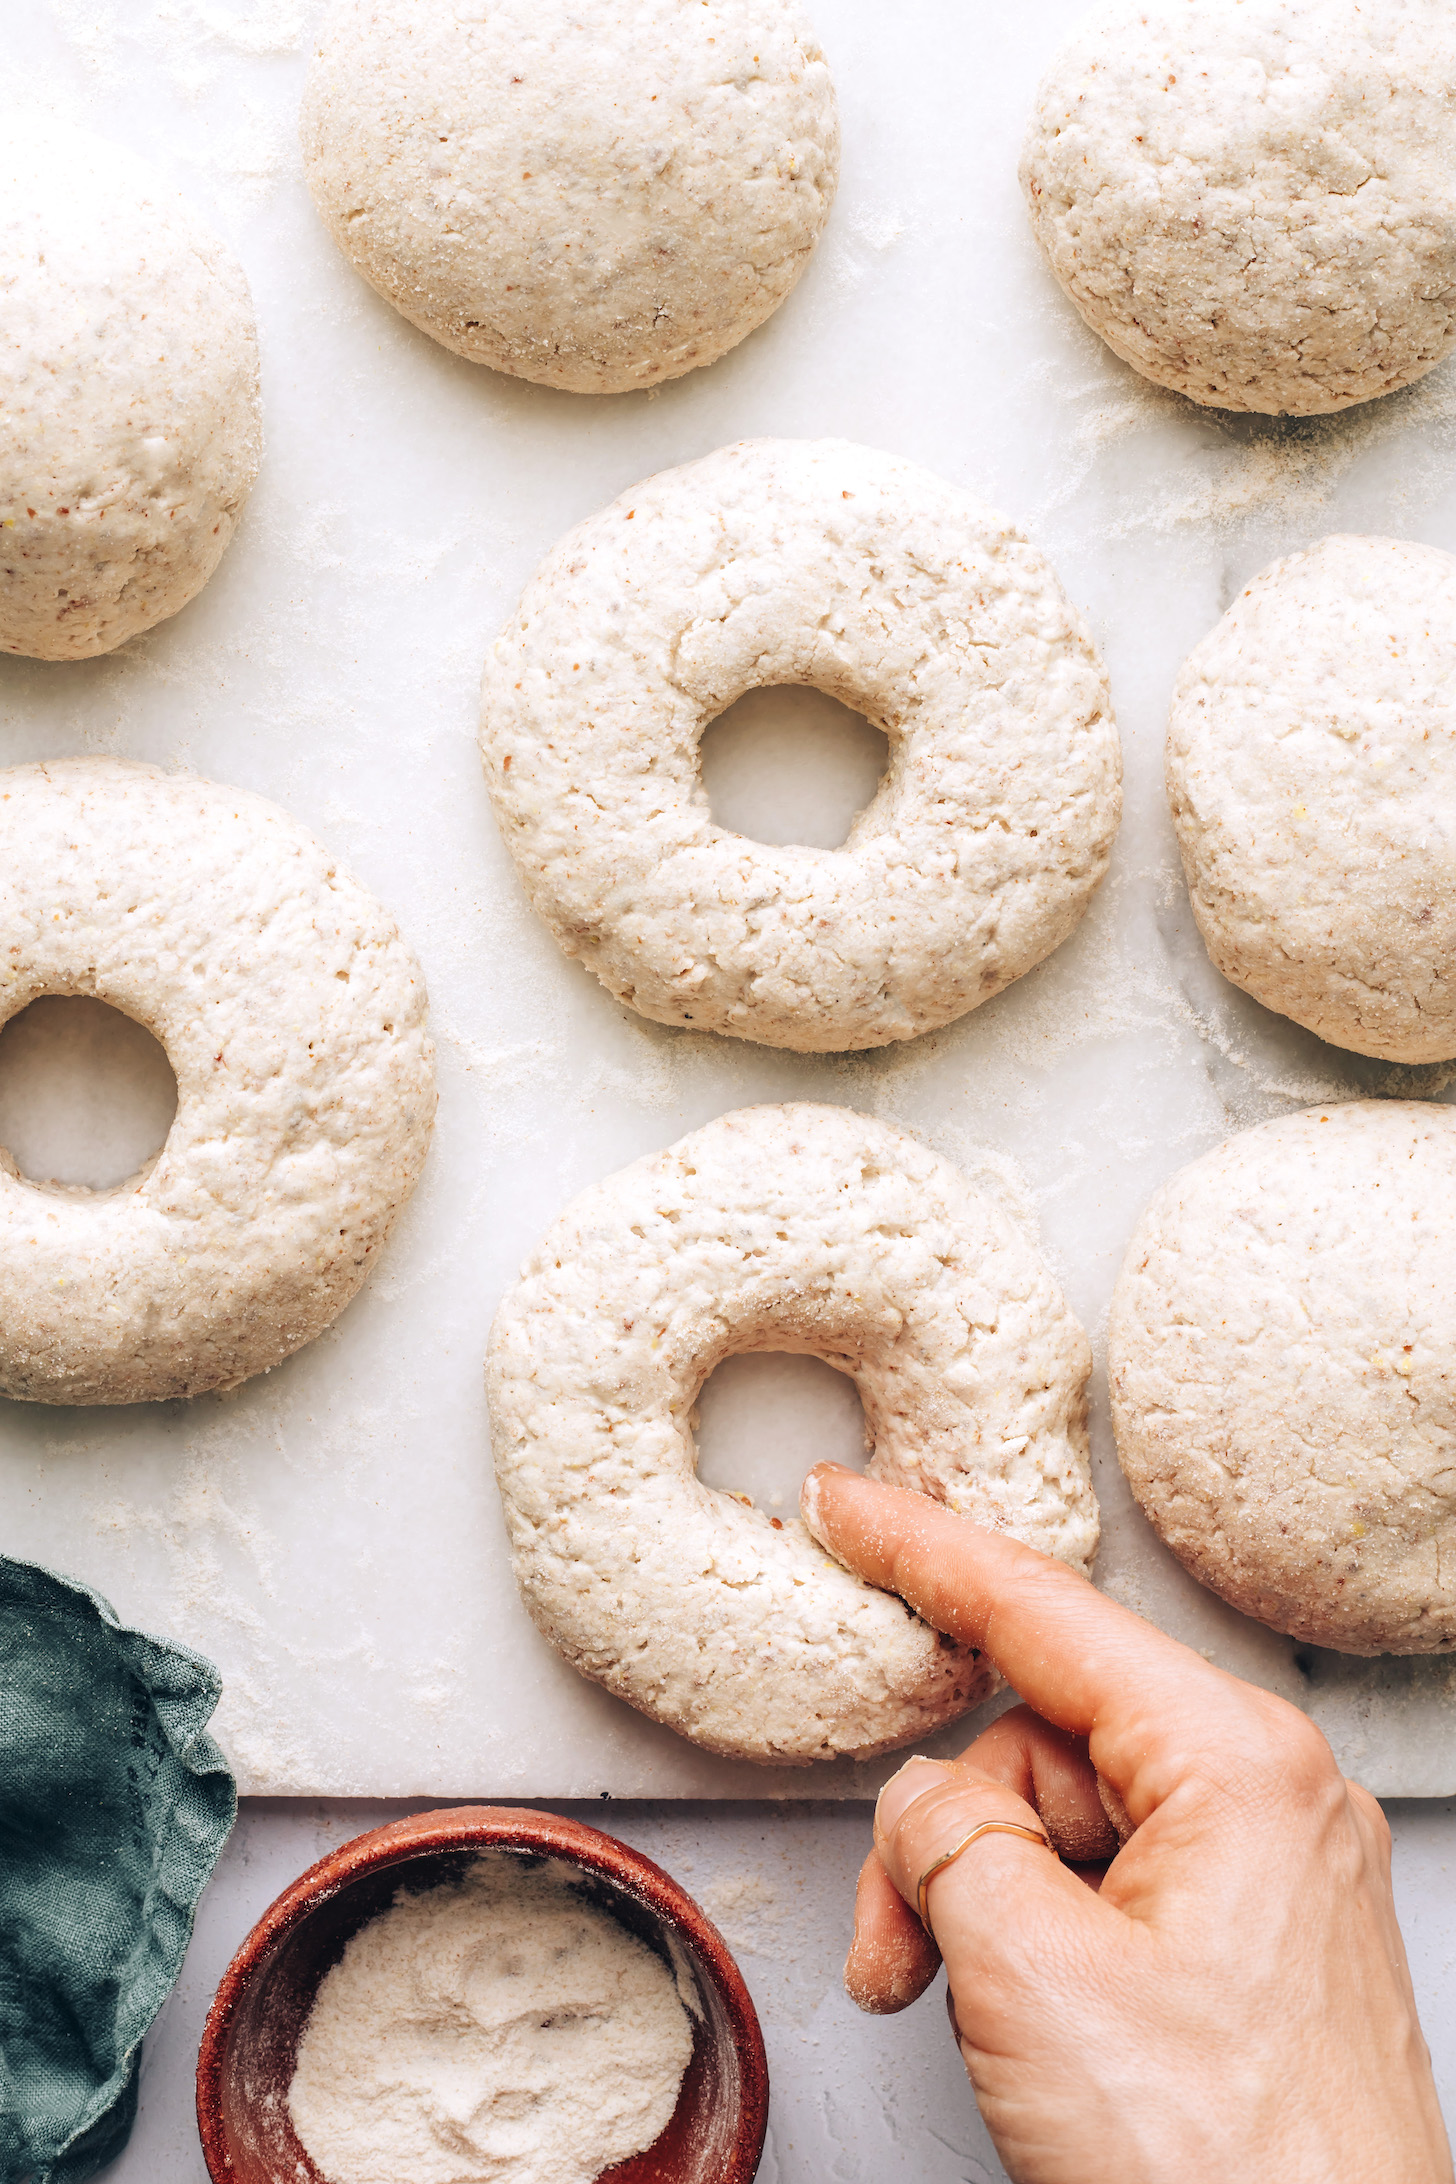 Forming bagel dough into bagel shapes